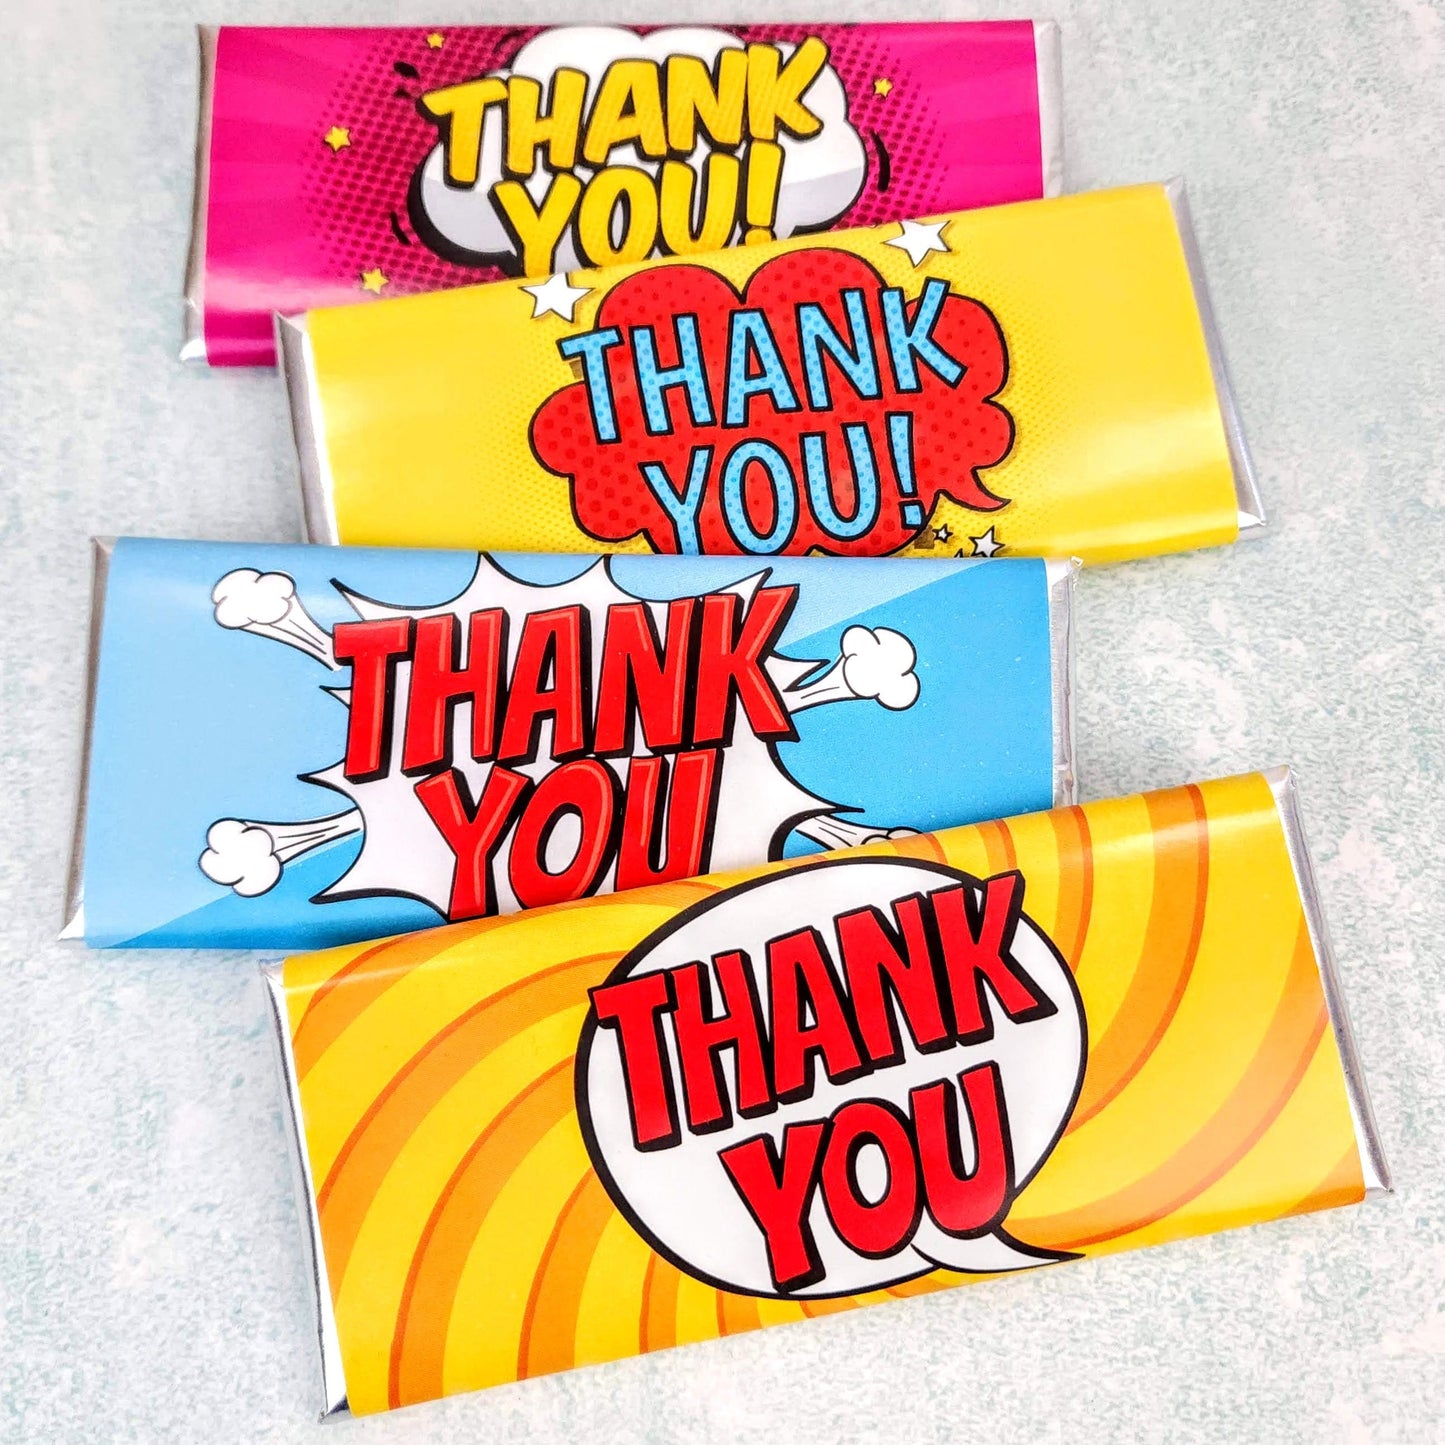 TY215 - Thank You Blue Burst Comic Candy Bar Wrapper Thank You Blue Burst Comic Candy Bar Wrapper Candy Wrappers TY215